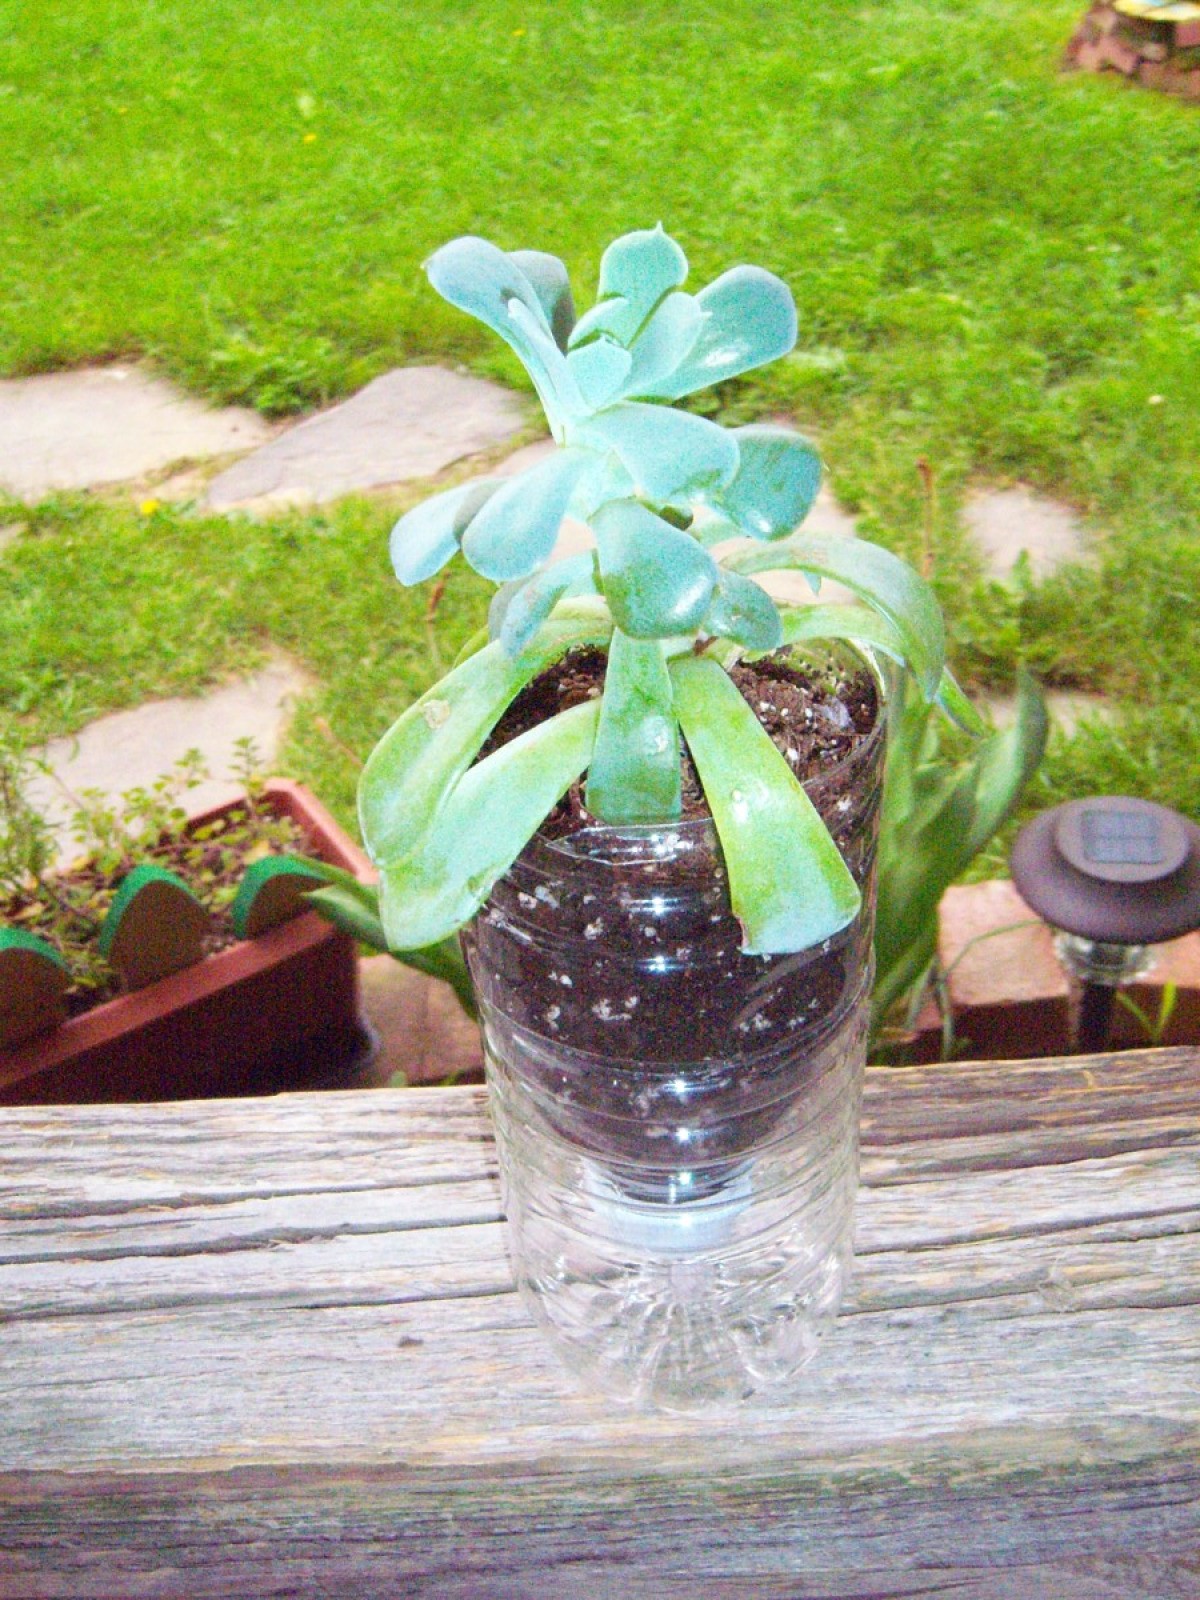 How to Make a Recycled Plastic Bottle Planter | ThriftyFun